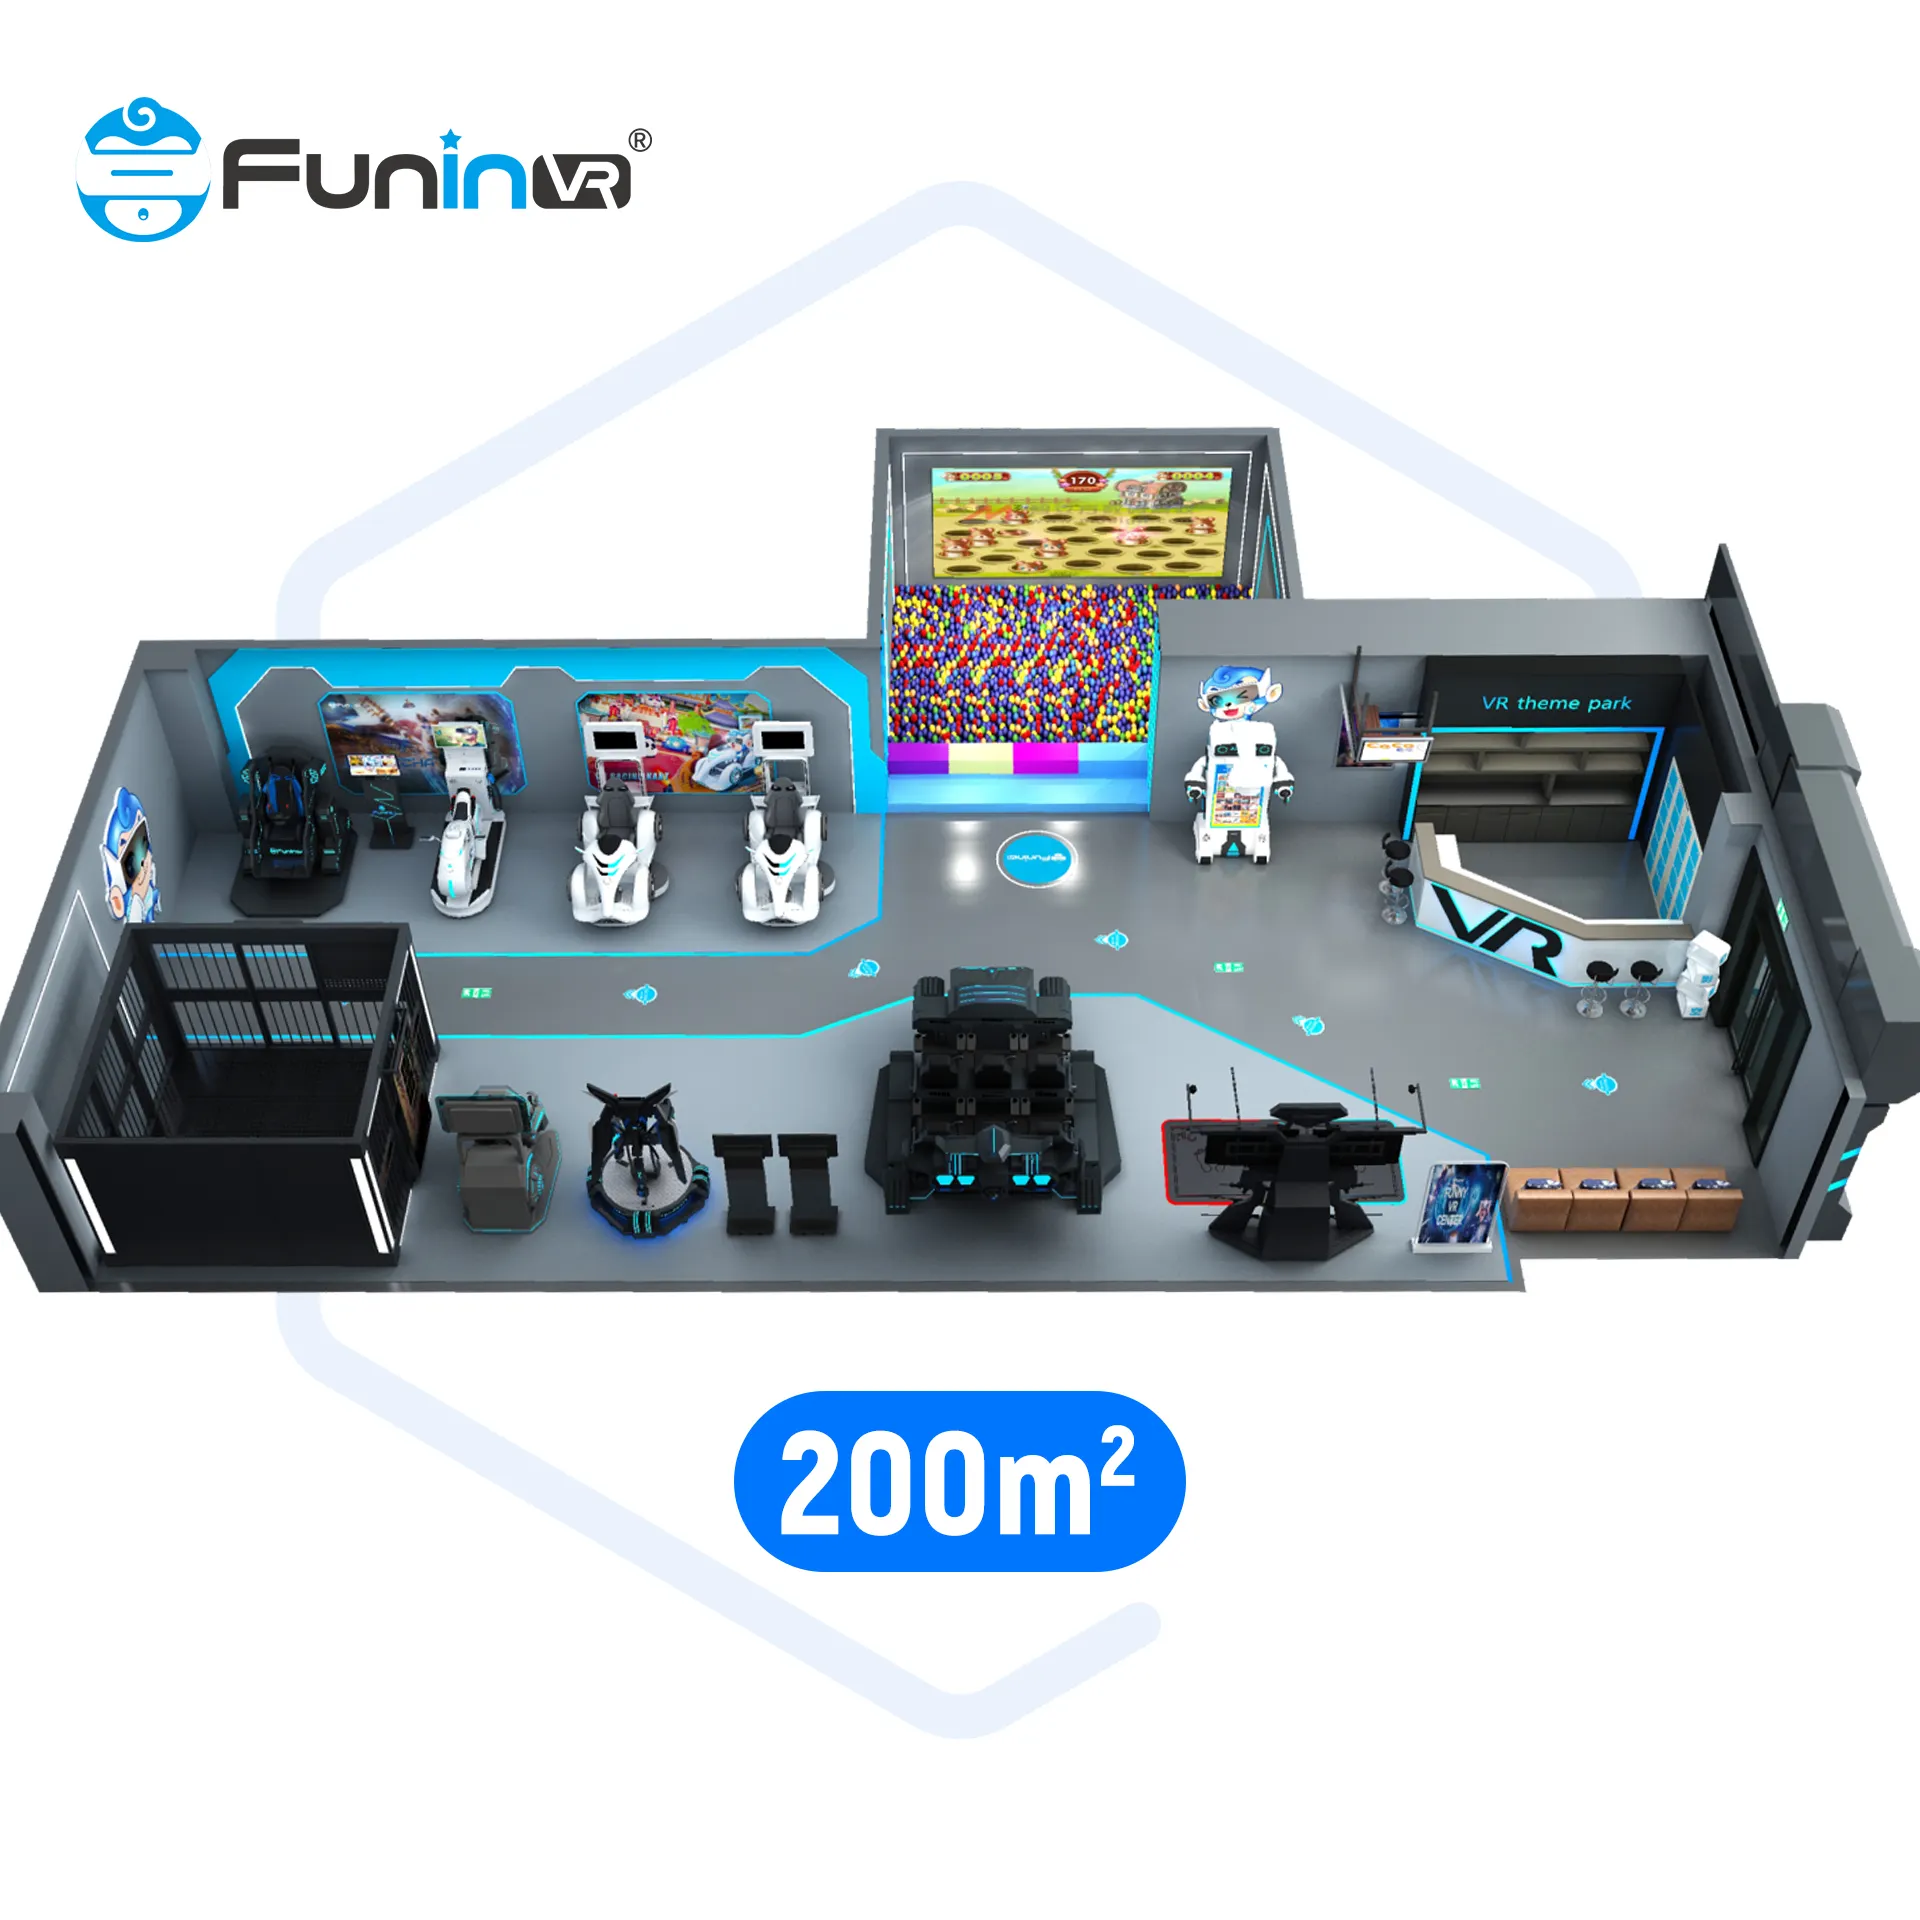 Funni China vr Factory Vr Manufacturer 9d Play Zone Indoor Game Zone Arcade Games Cinema VR Theme Park